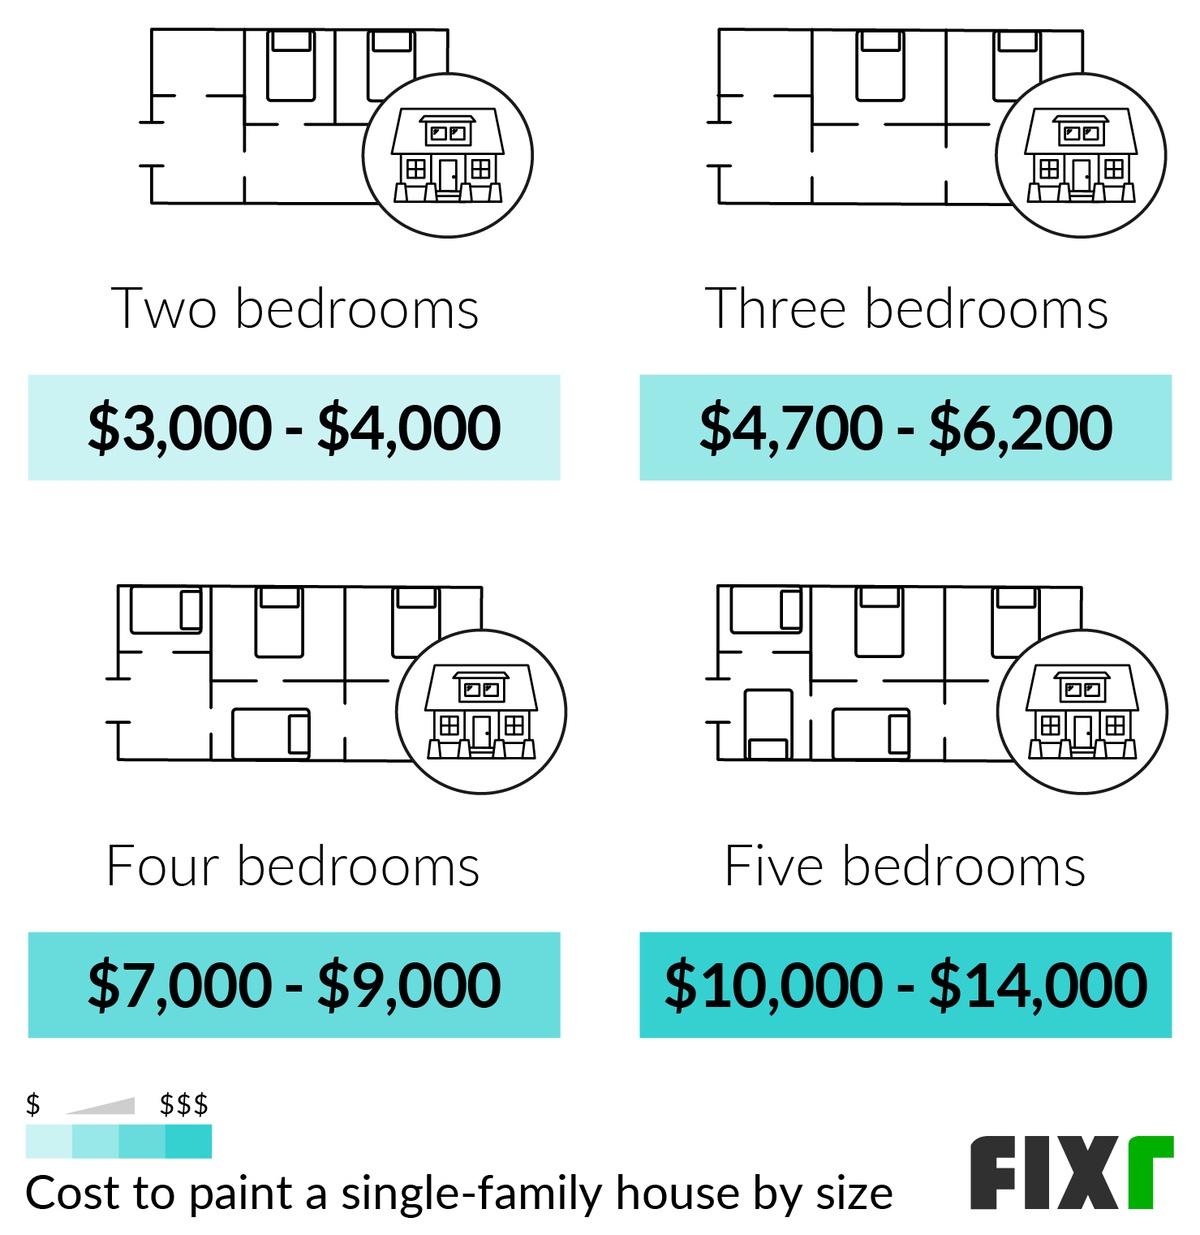 Cost to paint a two, three, four, and five-bedroom single-family house